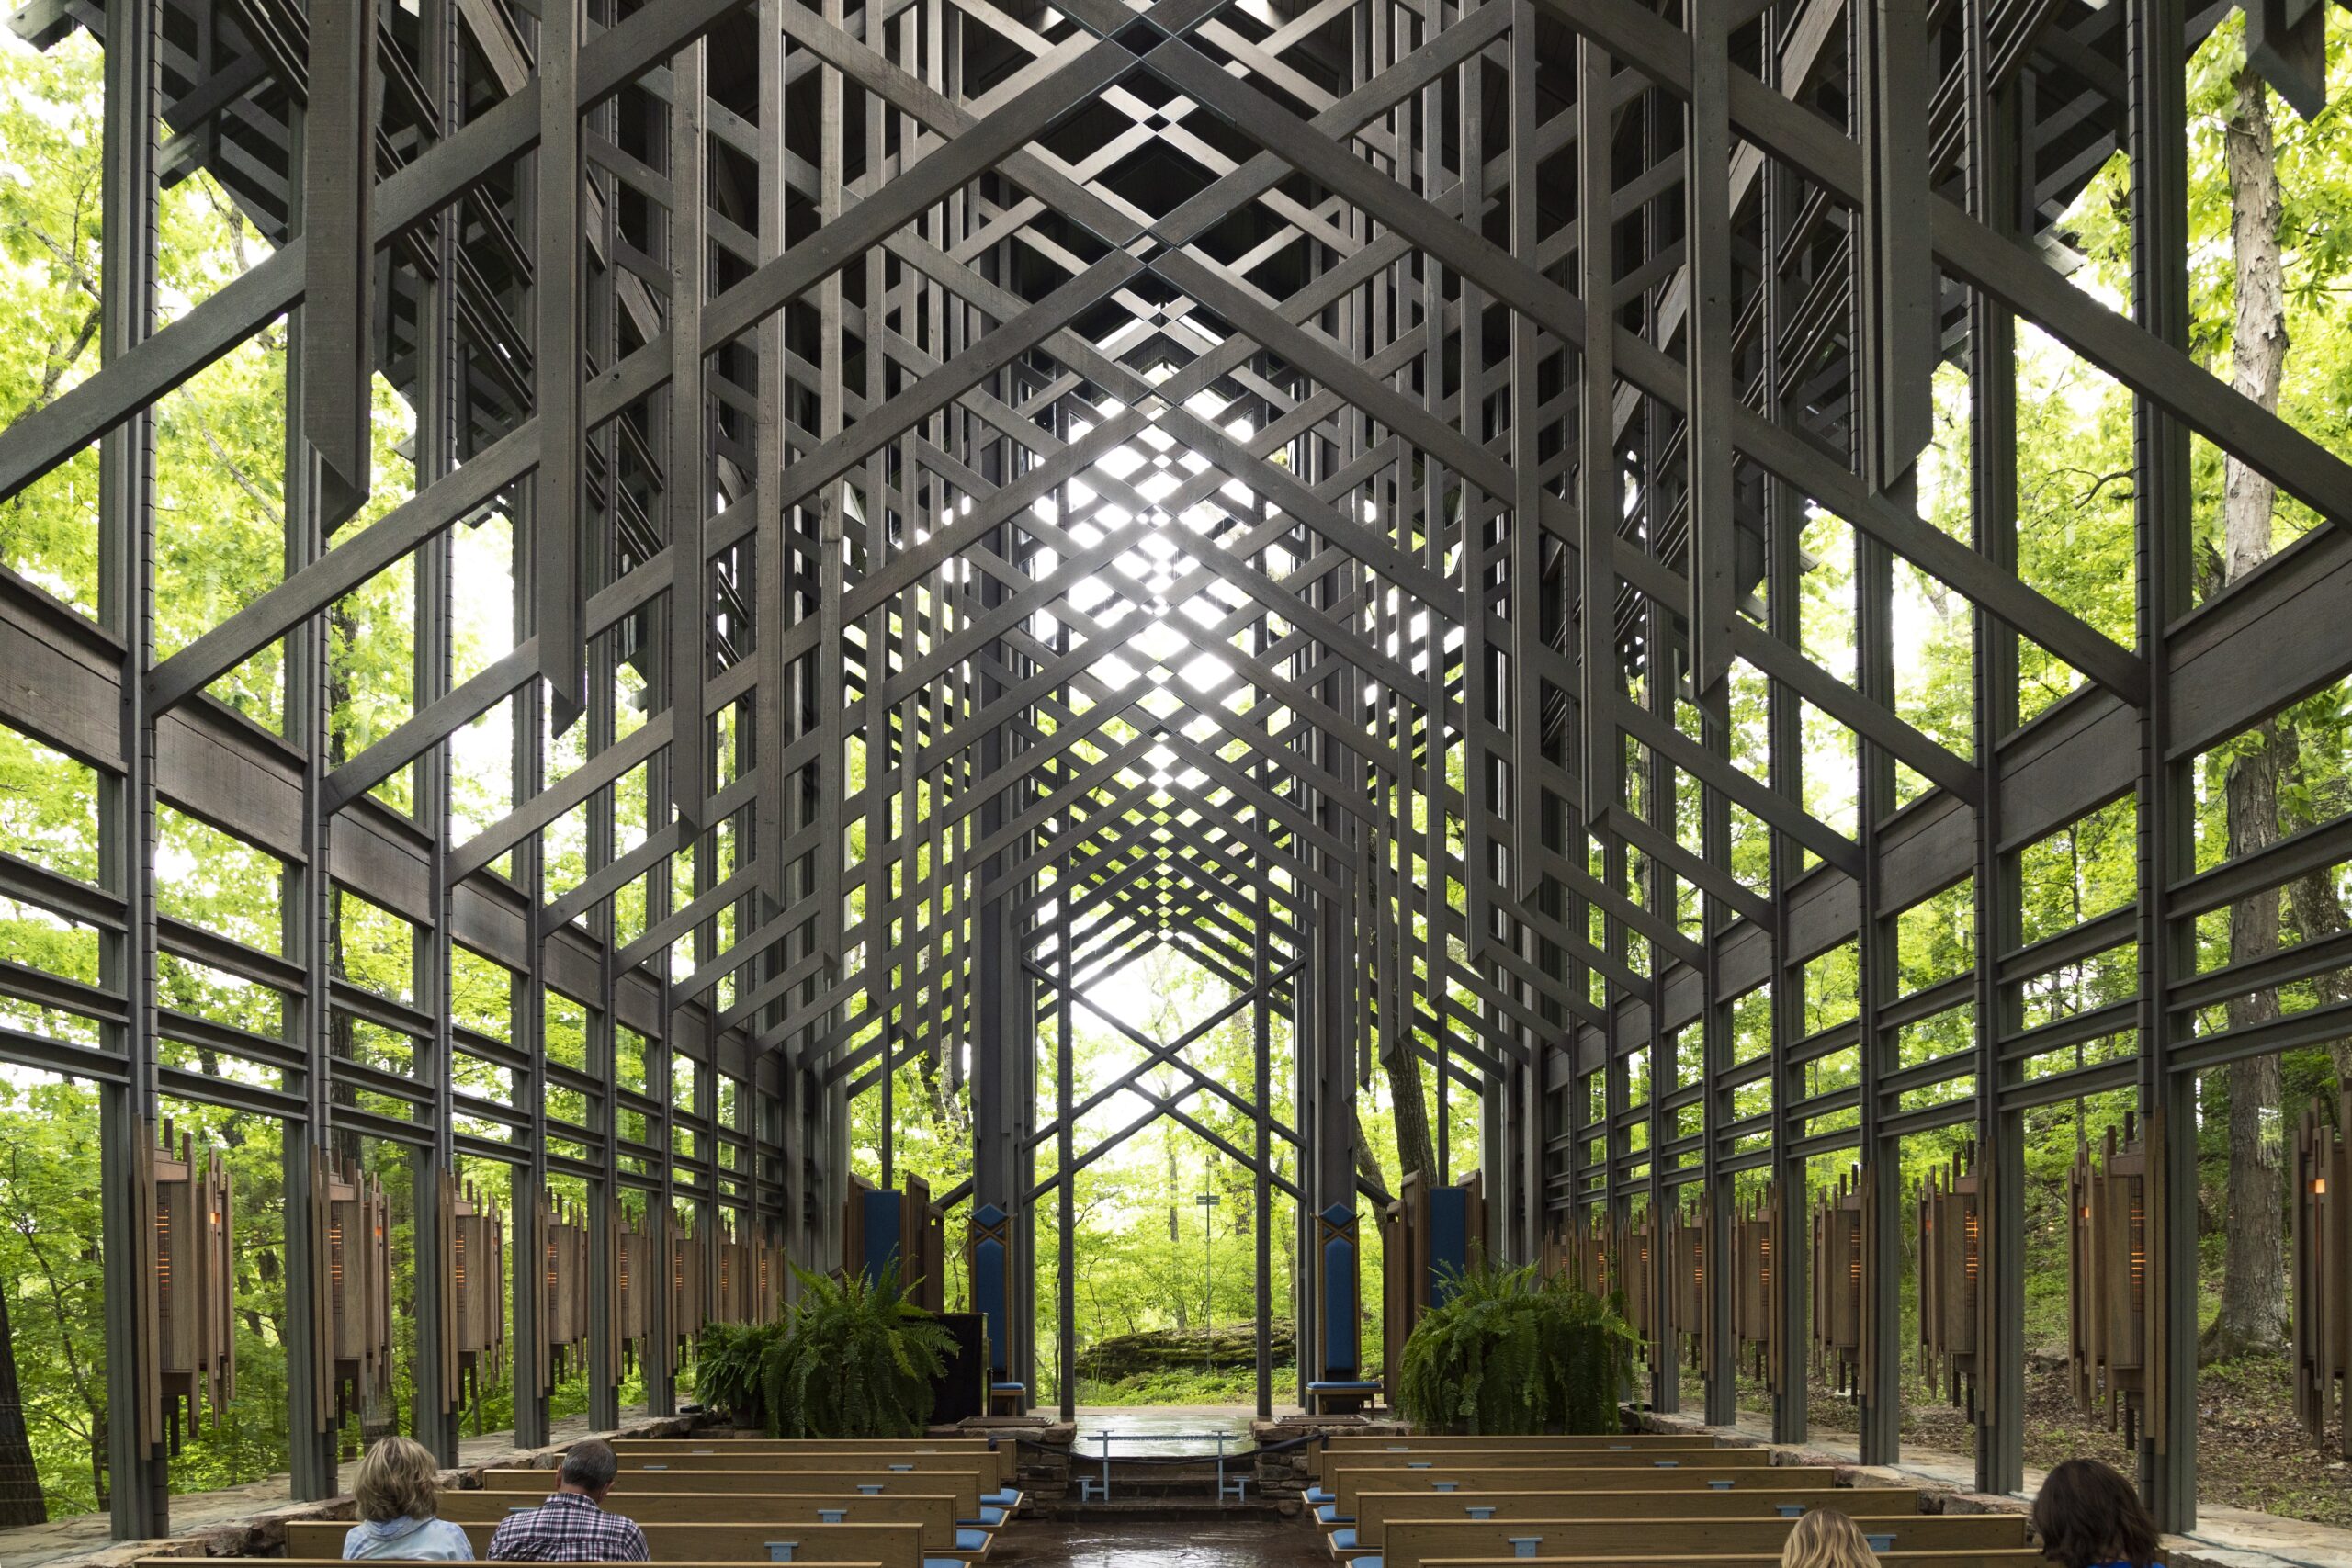 Thorncrown Chapel (Photo Credit: Eureka Springs City Advertising & Promotion Commission)